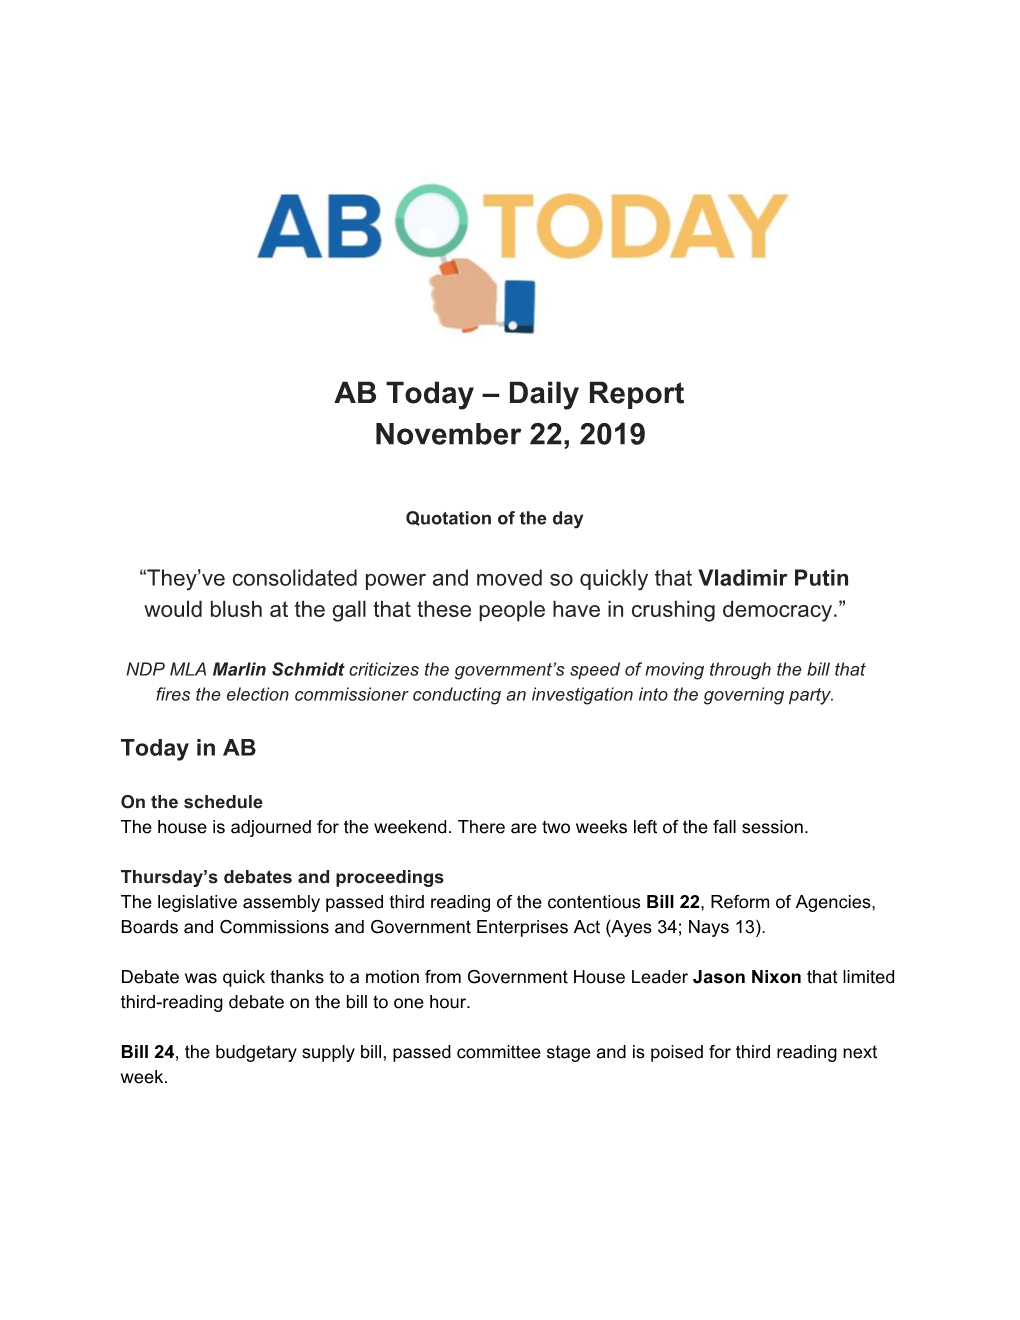 AB Today – Daily Report November 22, 2019